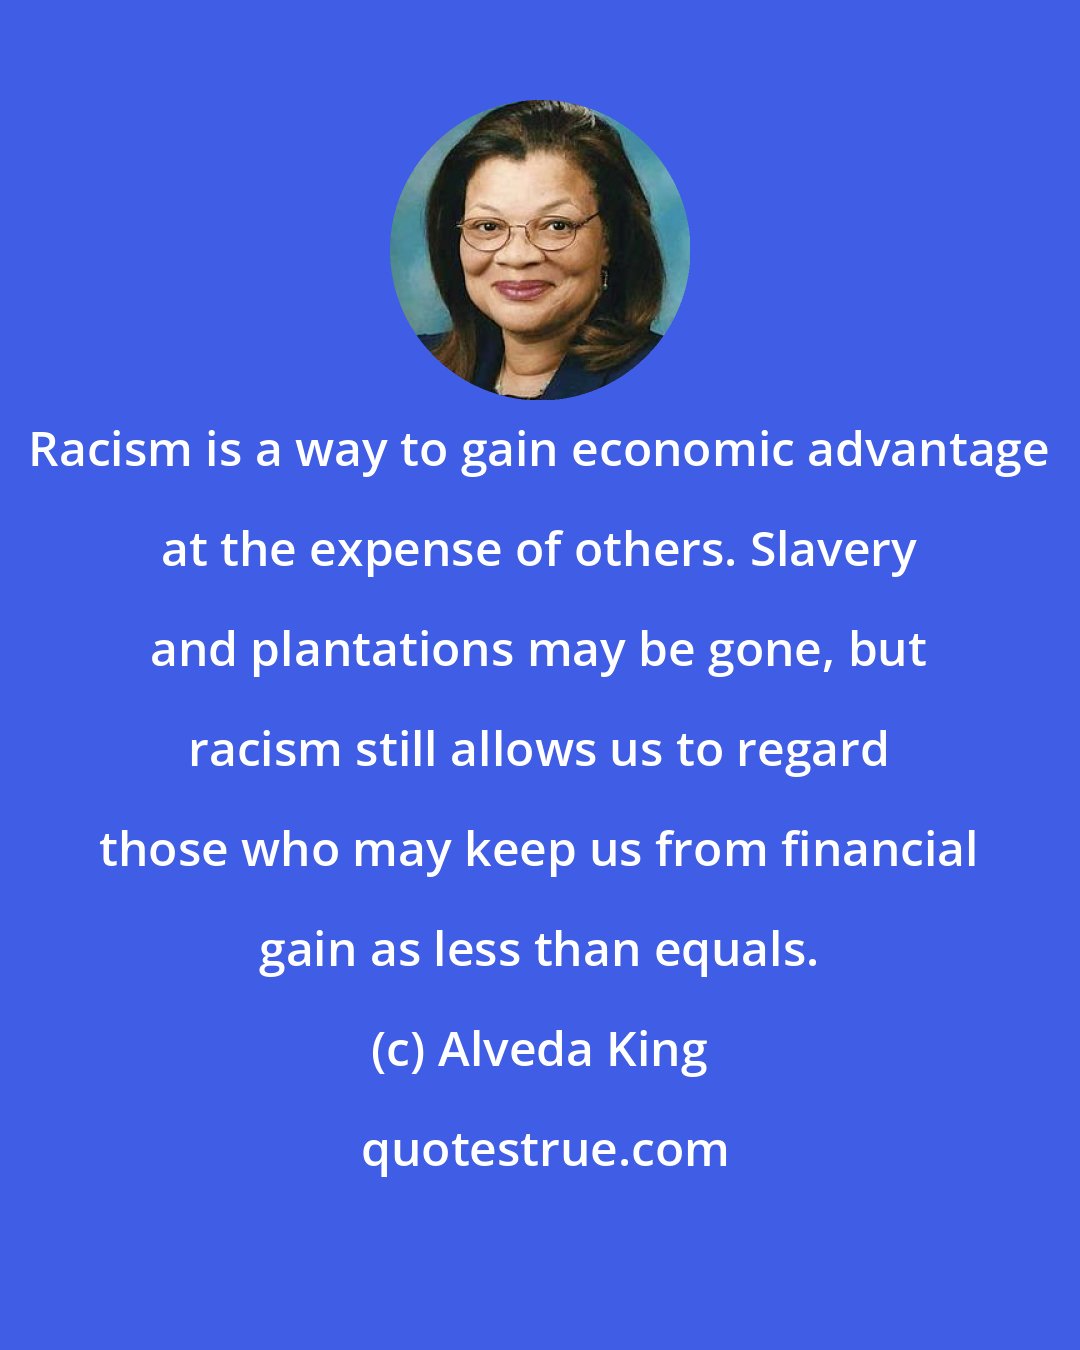 Alveda King: Racism is a way to gain economic advantage at the expense of others. Slavery and plantations may be gone, but racism still allows us to regard those who may keep us from financial gain as less than equals.